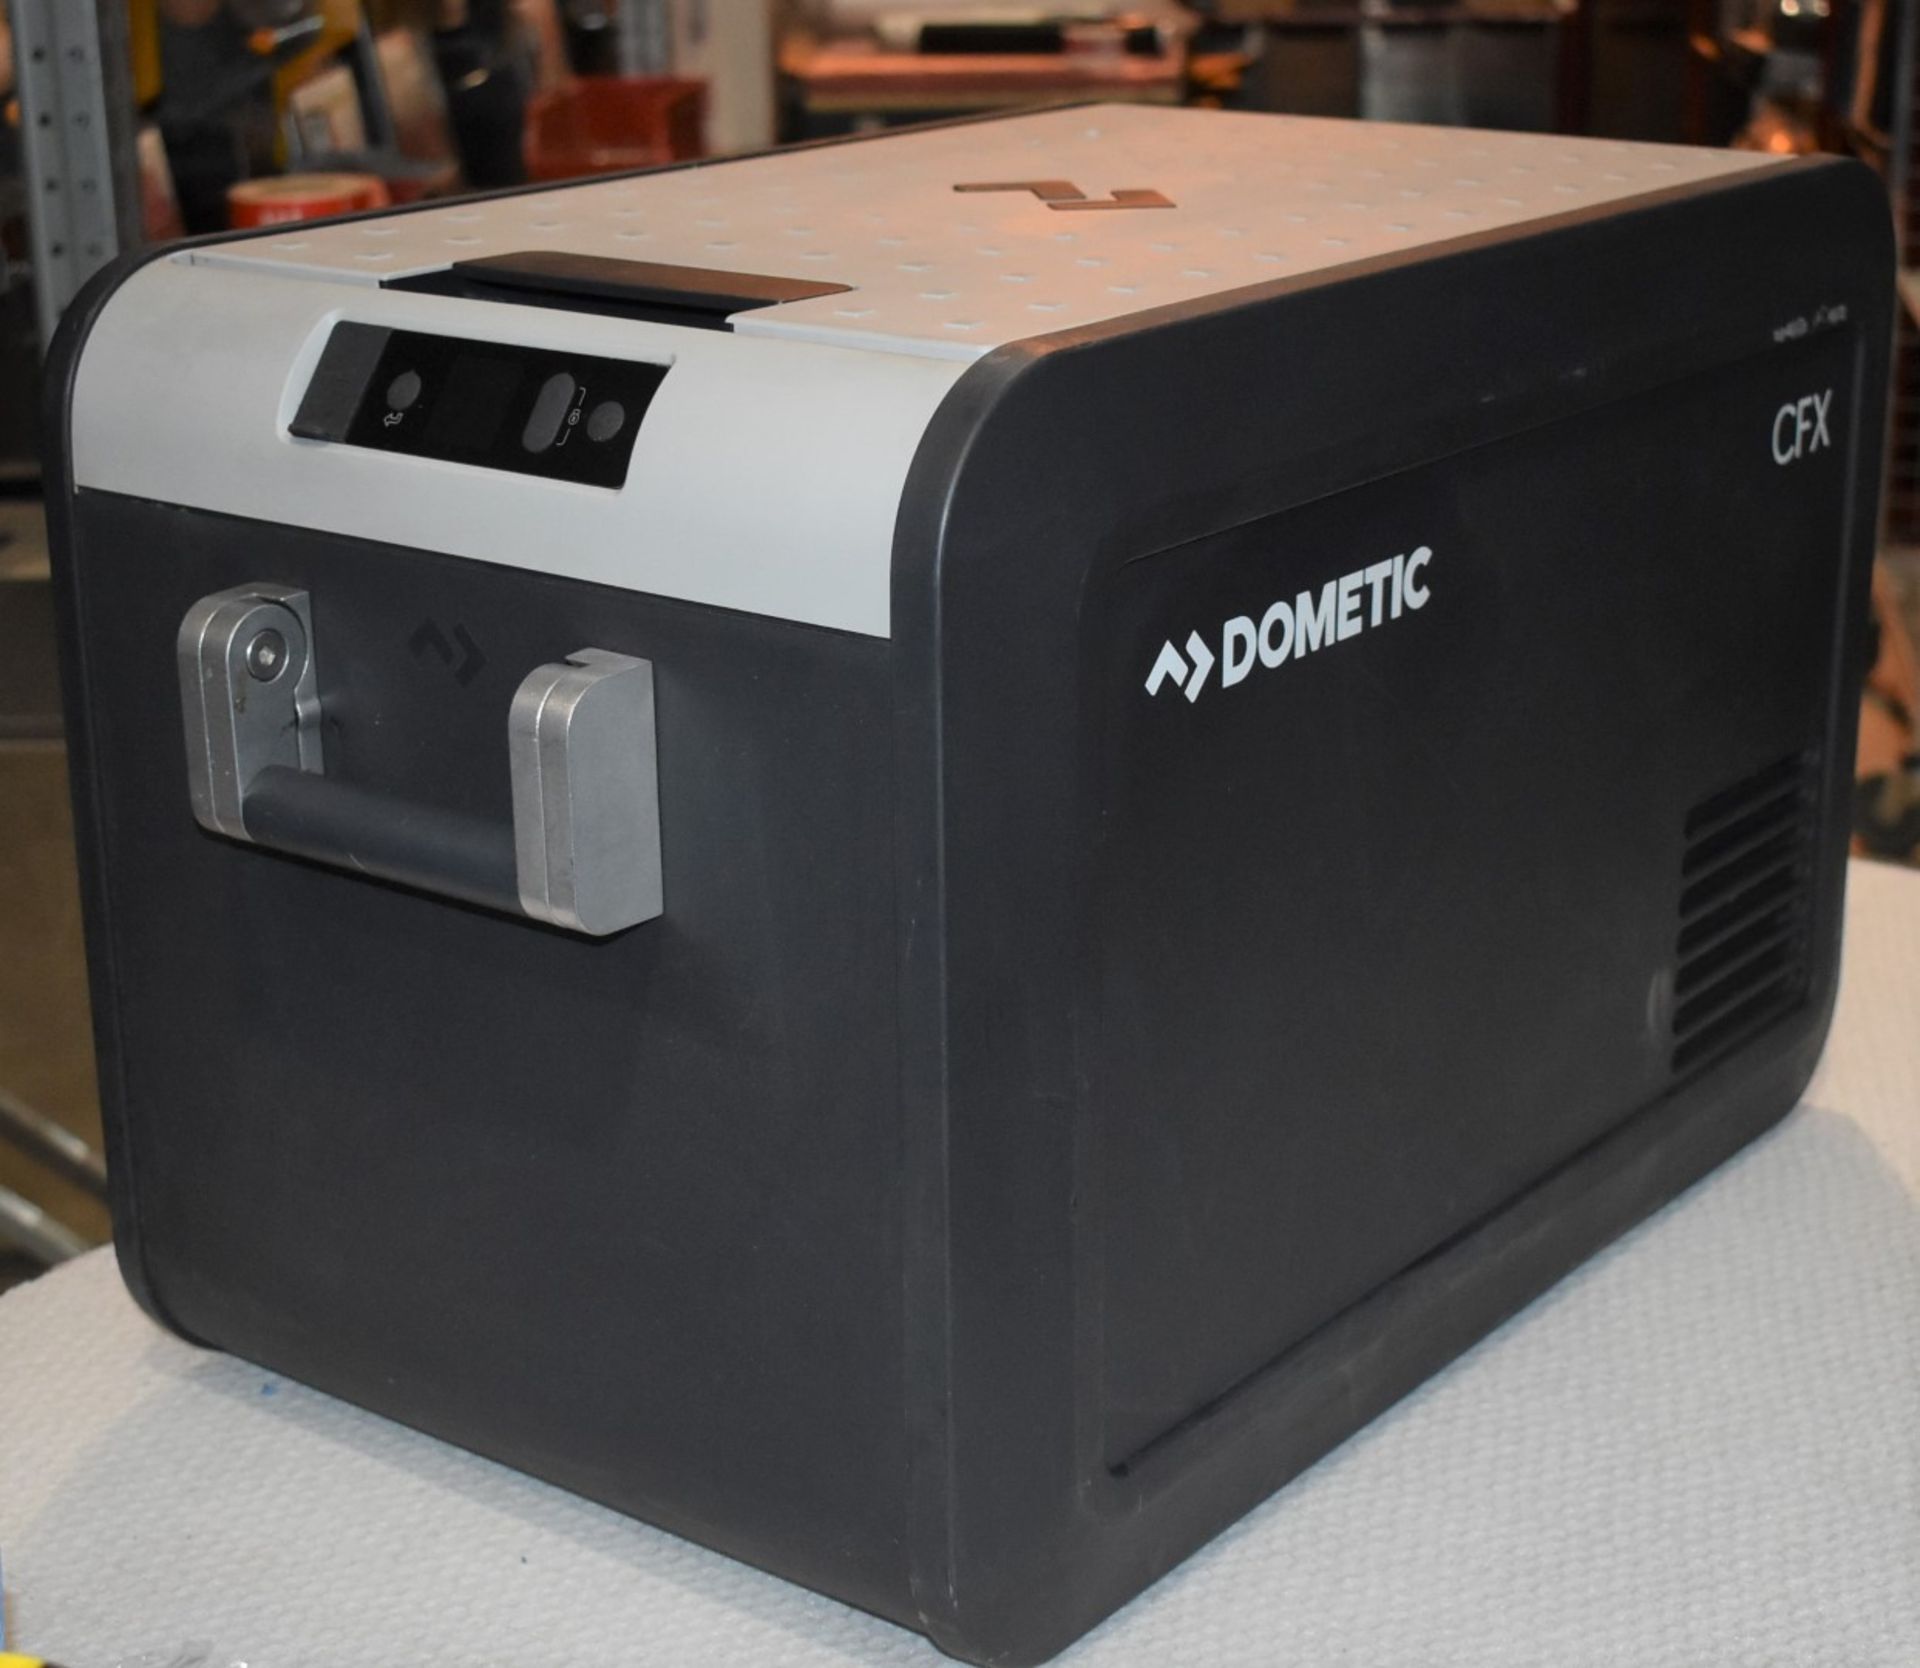 1 x Dometic CFX3 35 Portable 32l Compressor Cooler and Freezer - Perfect For Cooling The Christmas - Image 4 of 10